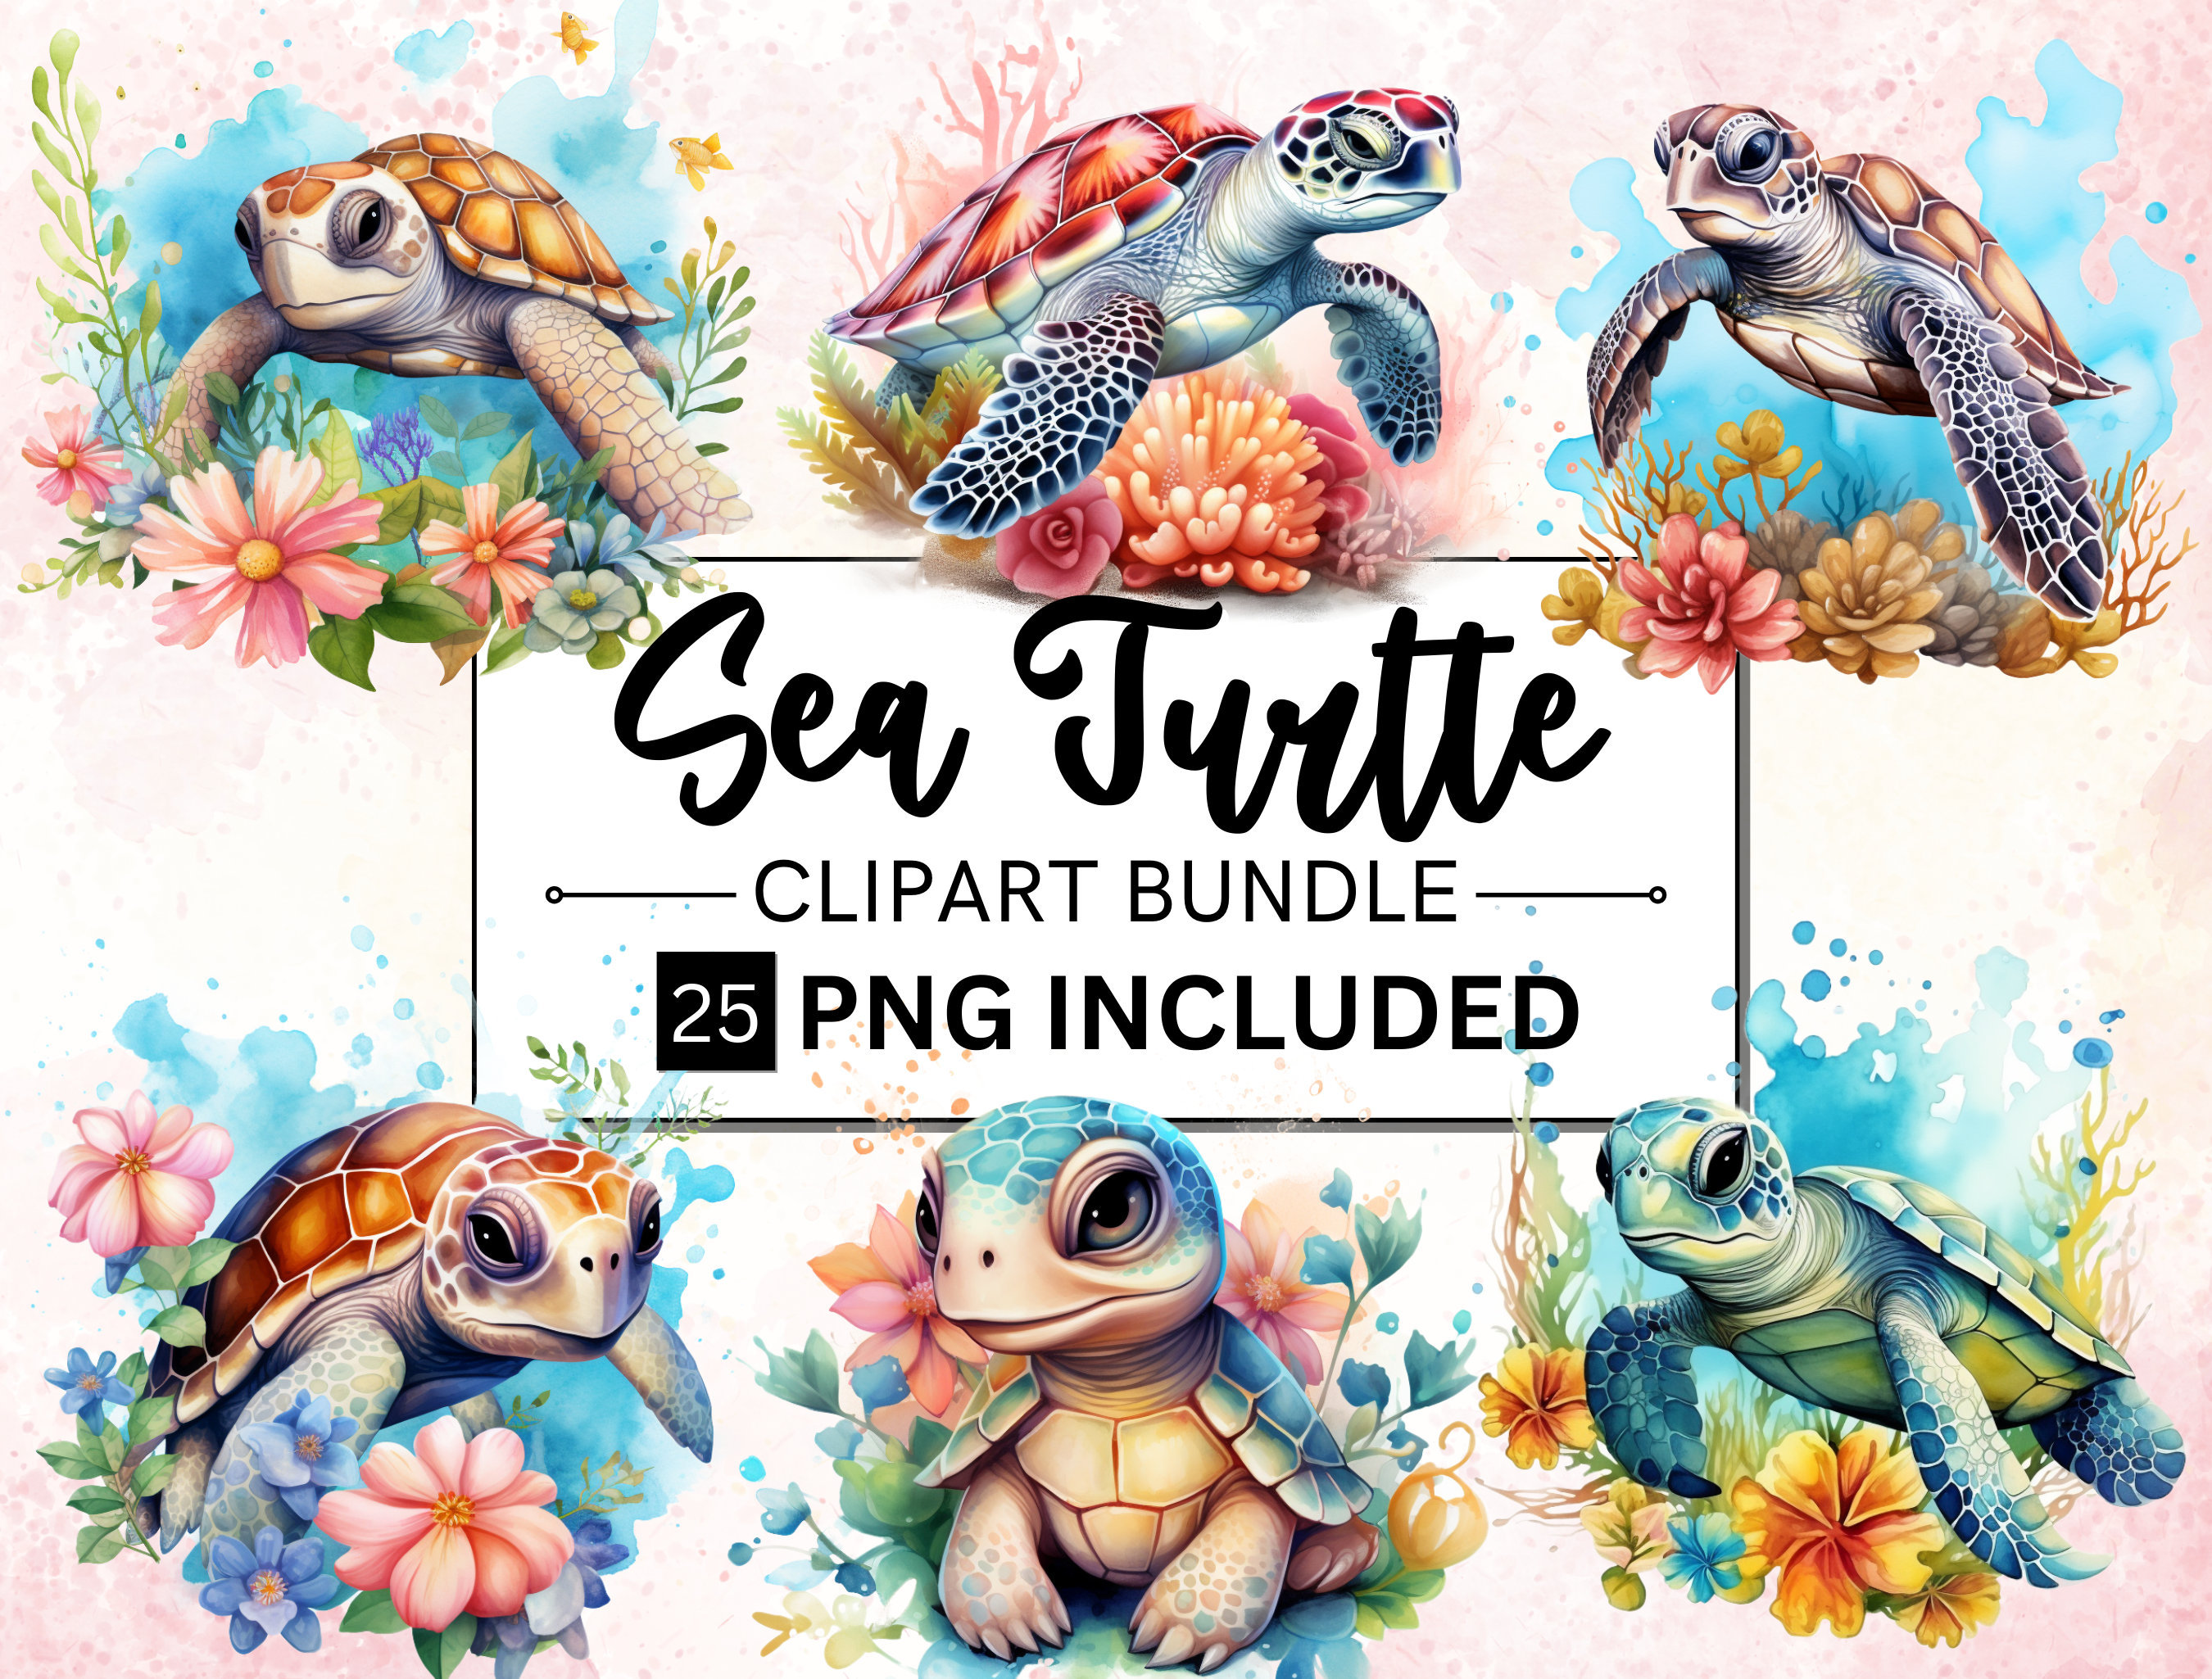 Heiheiup Turtle Animal Toys Miniature Figures Unique Turtle Toys Detailed  Reptile Party Decorations And Gifts For Kids Things for 11 Year Old Girls 